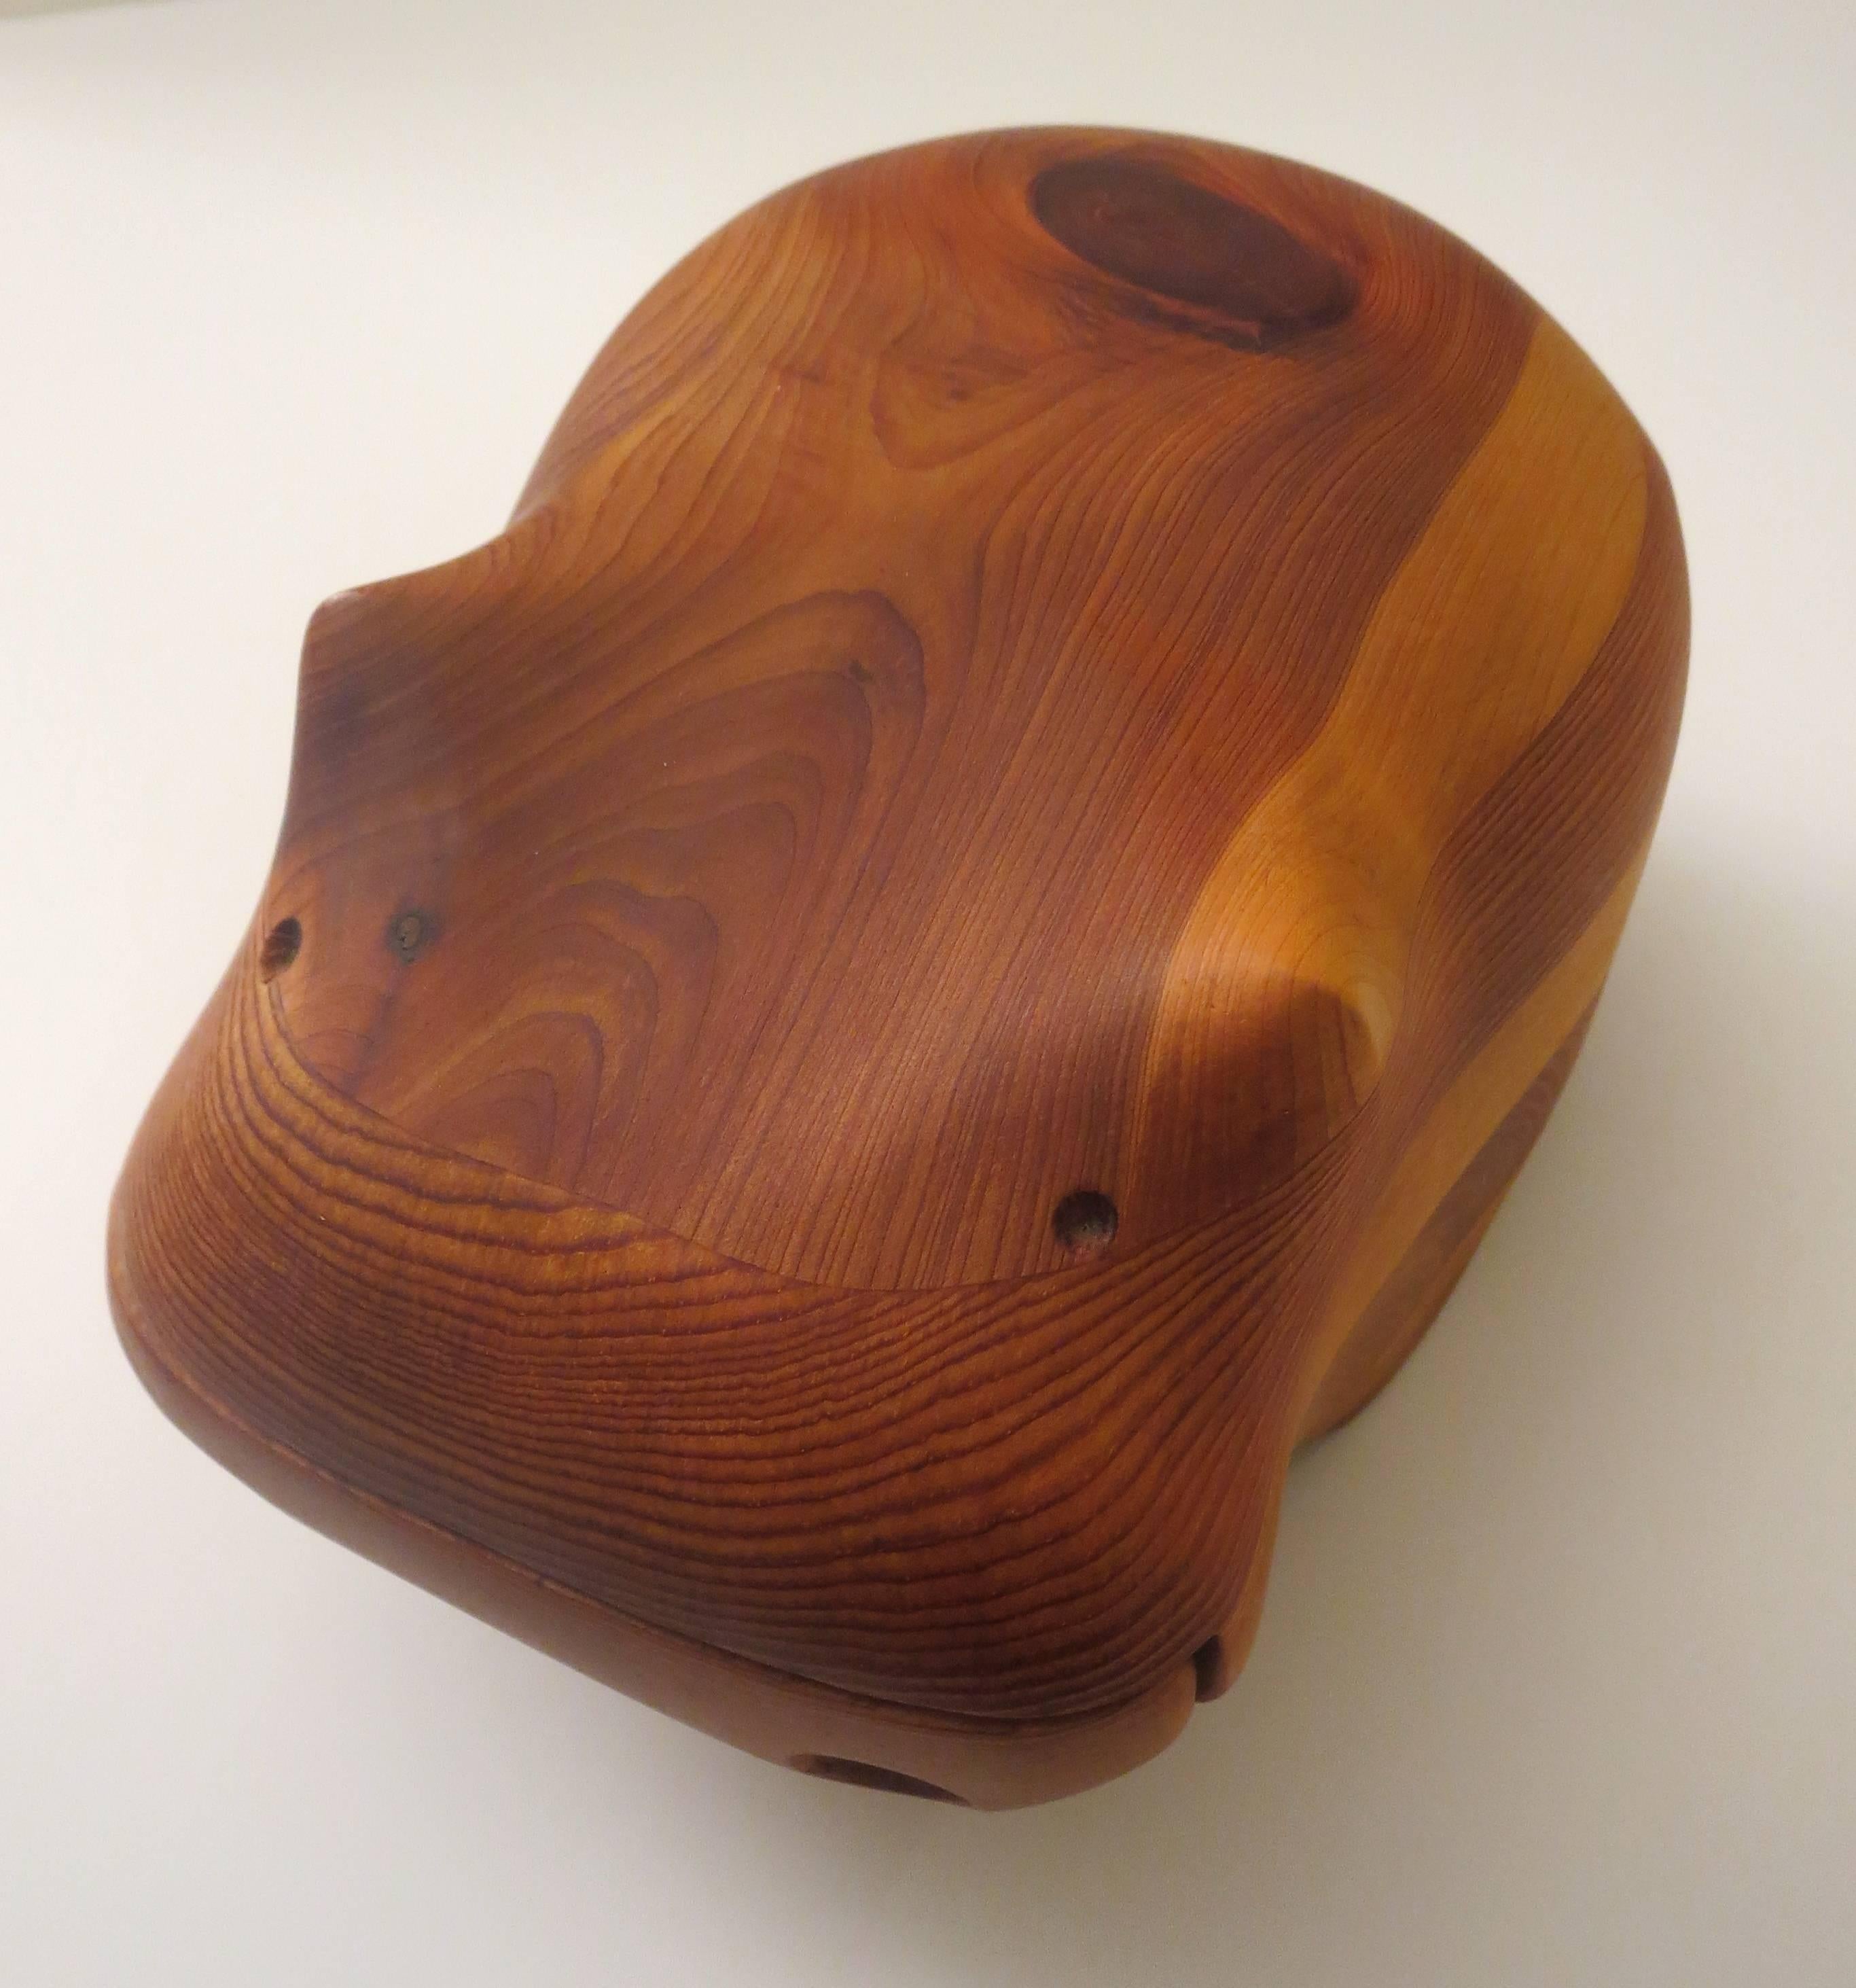 Incredible craftsmanship on this solid staved pine and cedar hippo box designed and hand crafted by artist Deborah Bump. Fully signed on bottom. Circa 1970s.

